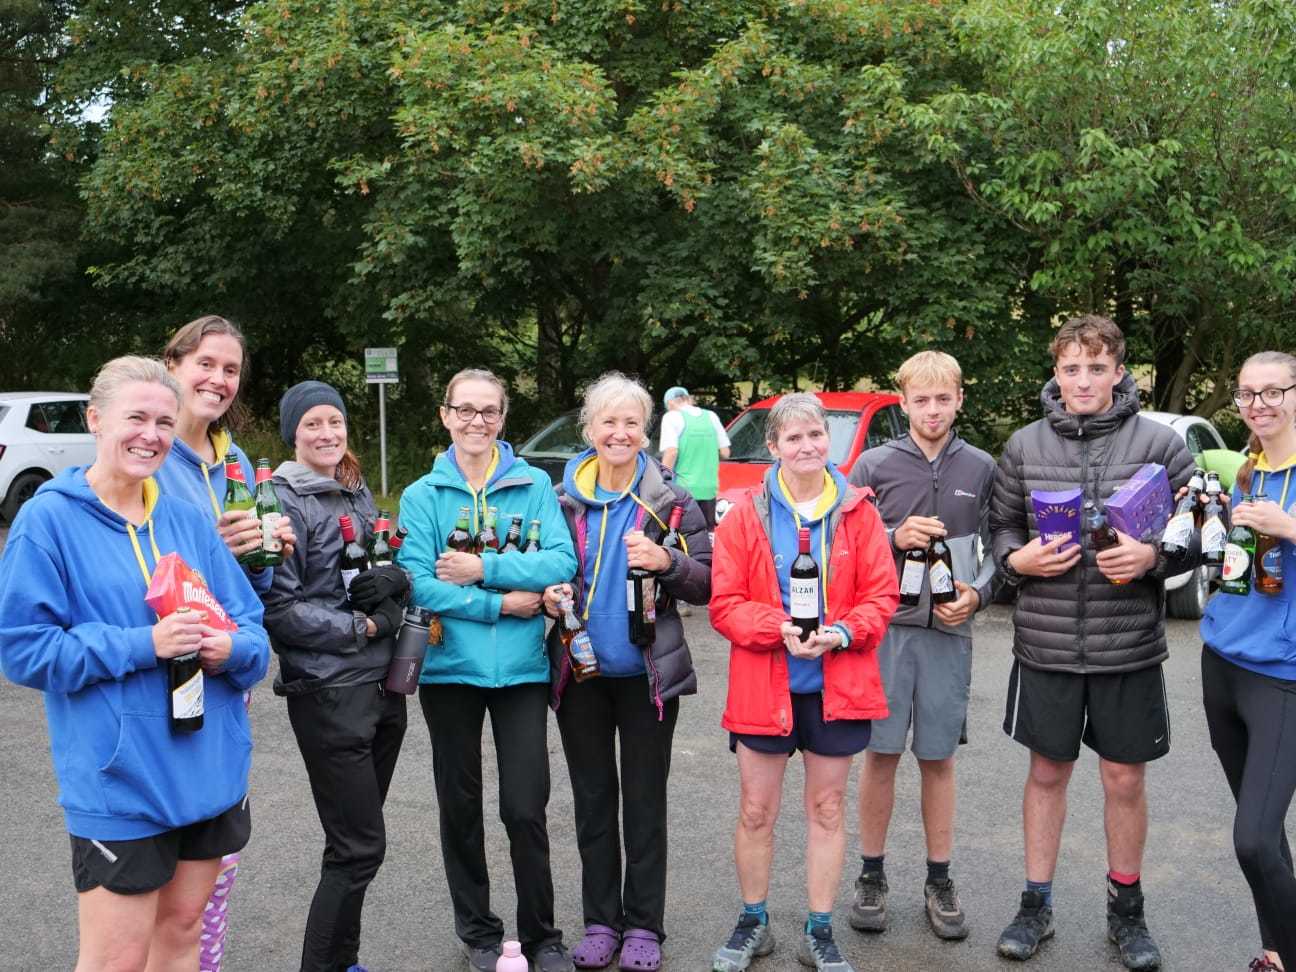 Lucy Sillars, Rosie Gatenby, Esther Harrison, Trudy Morrice, Helen Ashworth, Hilary Coventry, Cameron Balmain, Freddy Wharton and Beth Haggath, prizewinners at the Cock Howe and Beyond Fell Race Picture: HELEN ASHWORTH